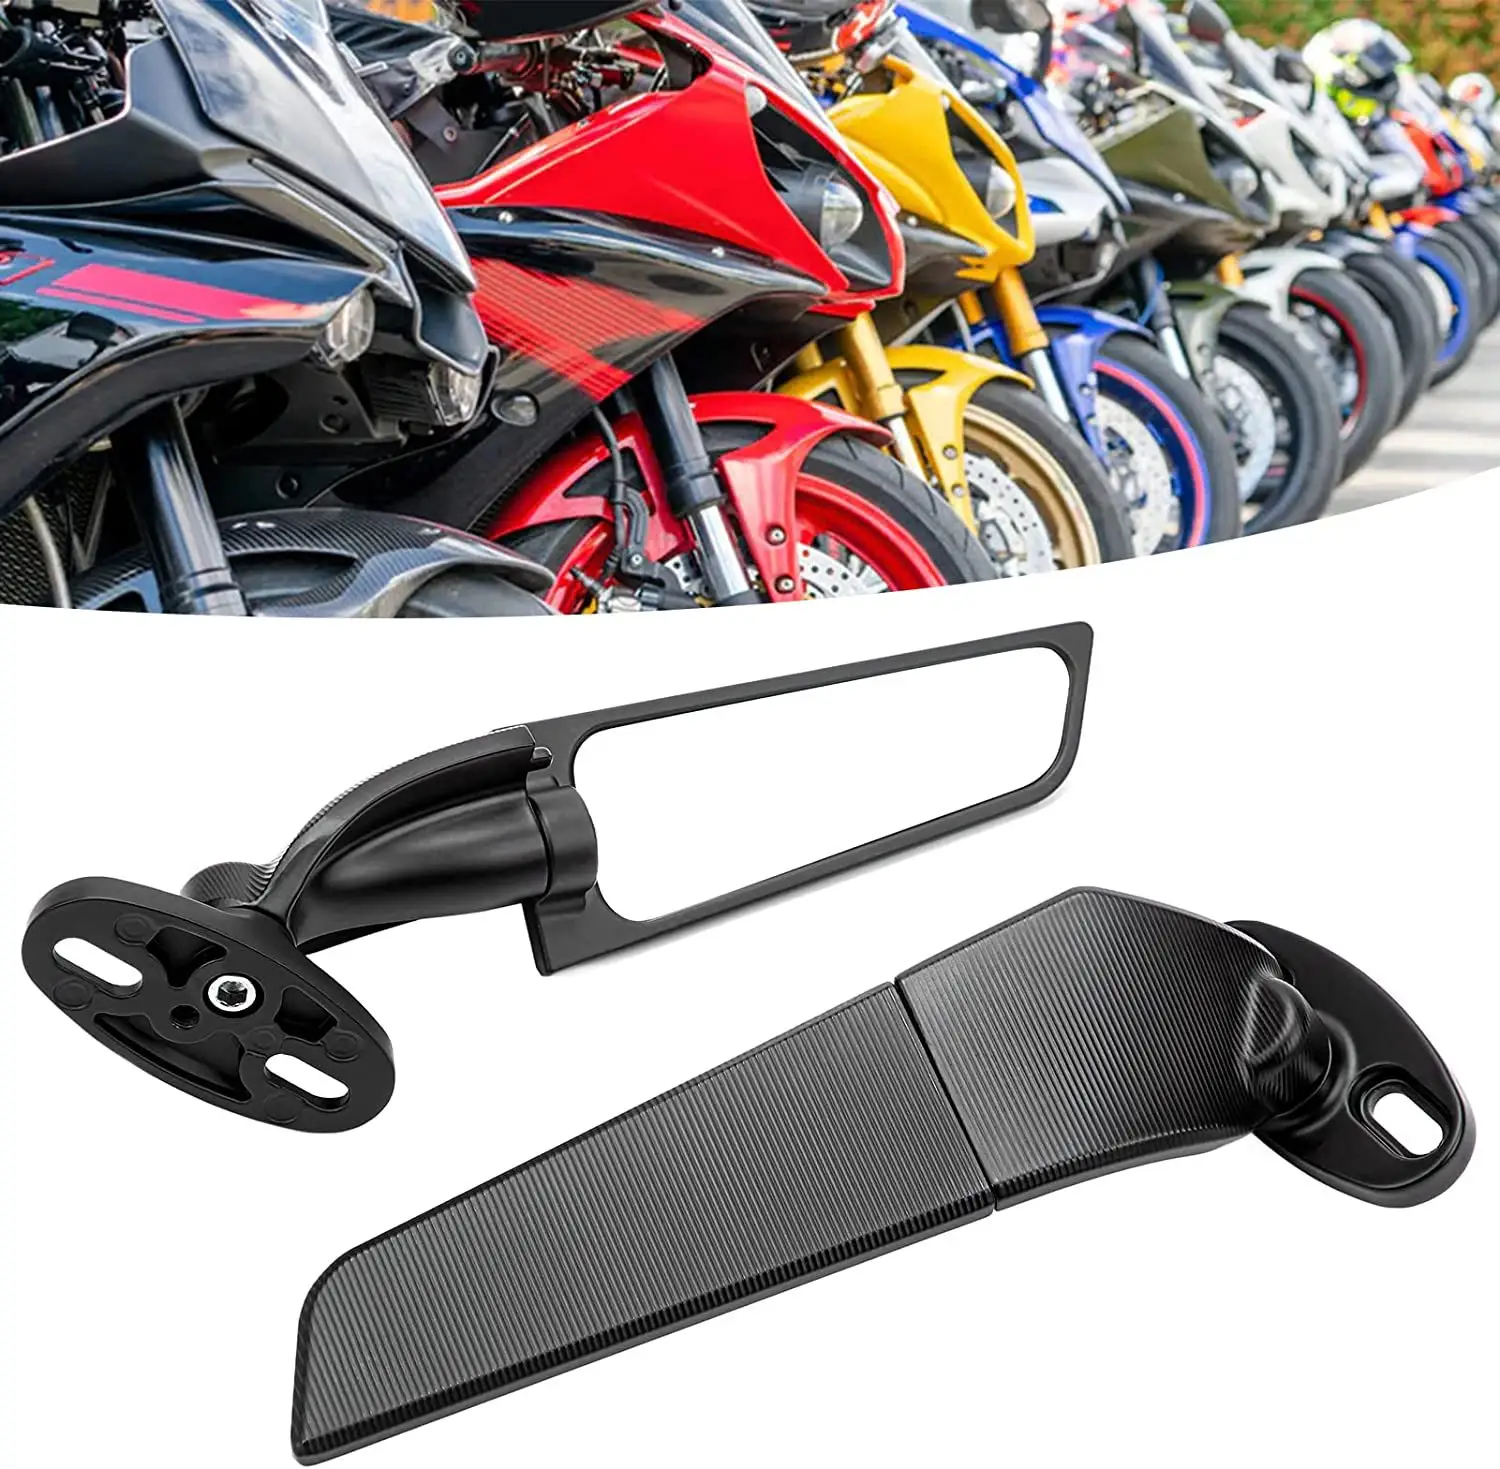 Universal Motorcycle Rearview Mirror Wind Wing Adjustable Side Mirrors Motorbike Wing Style Cnc Rearview Mirror